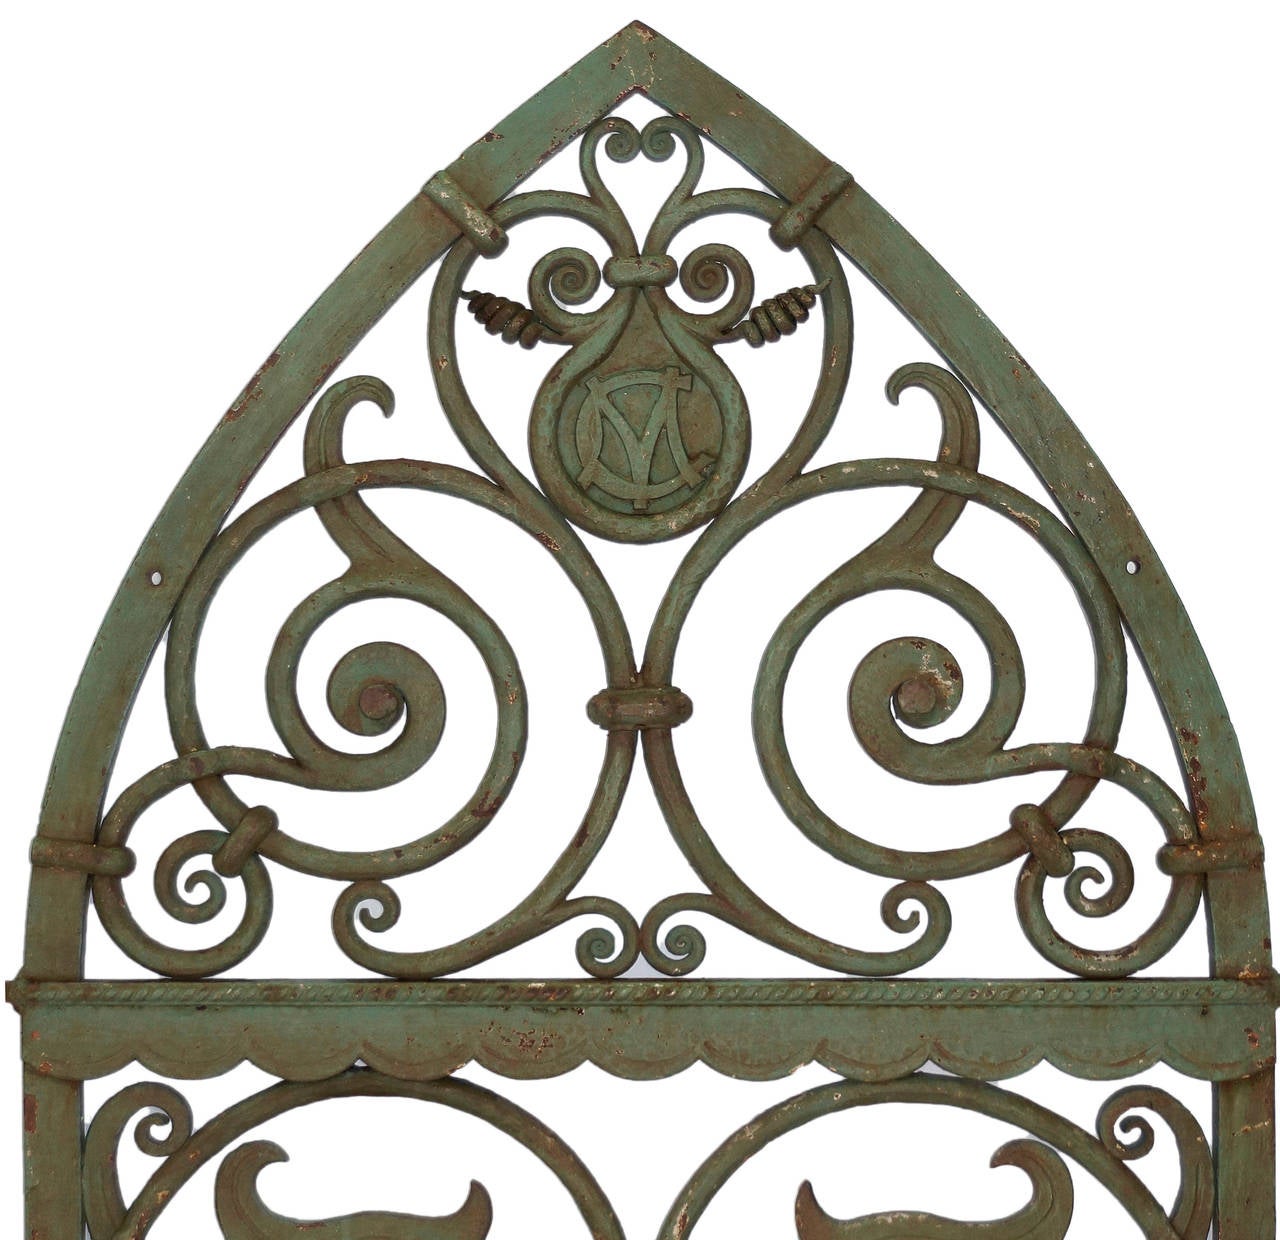 Wrought Iron Highly Decorative Gothic Revival Window Guard Mascarons For Sale